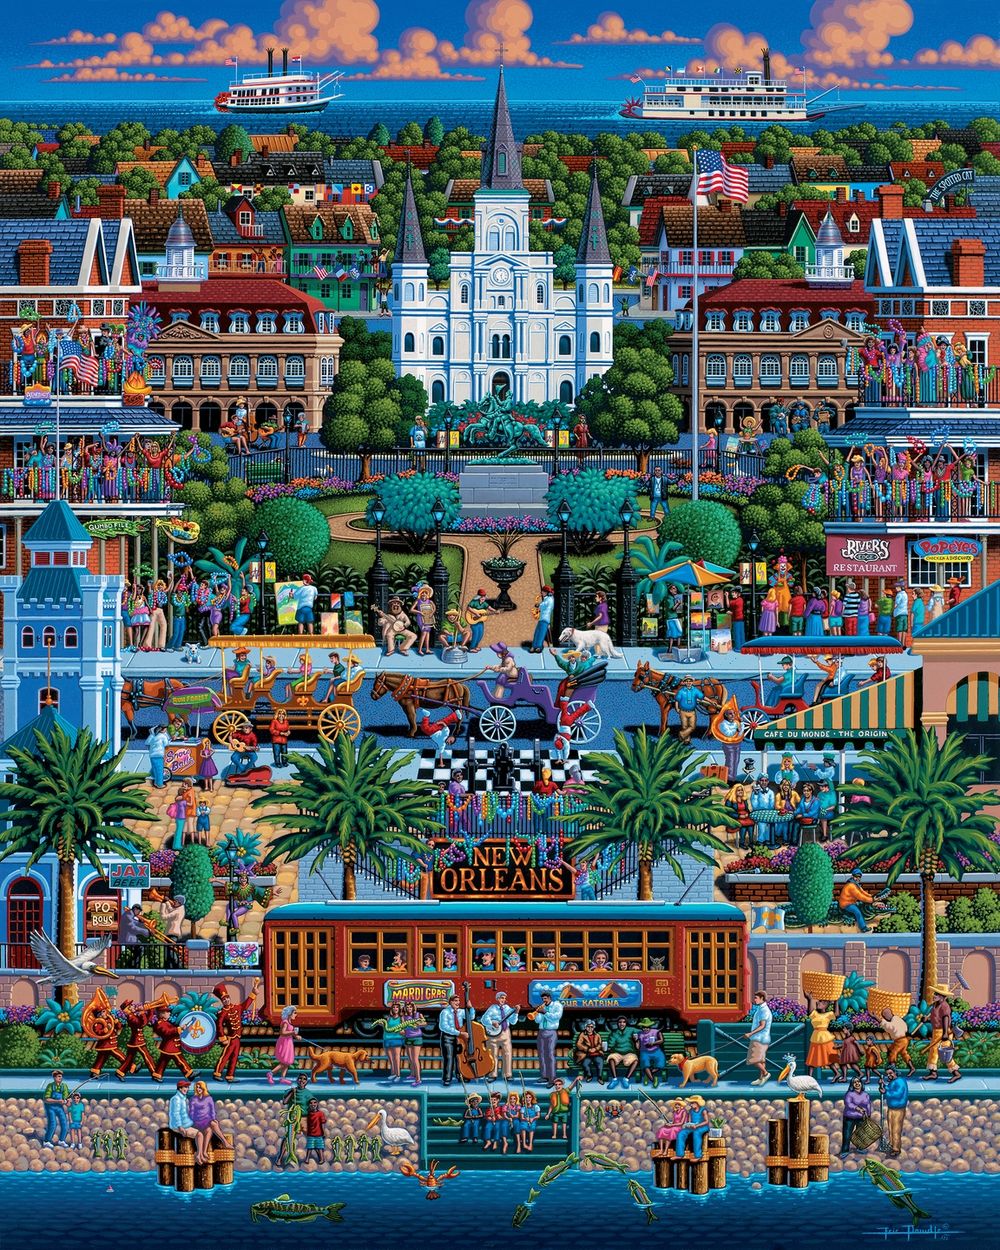 New Orleans - Wooden Puzzle